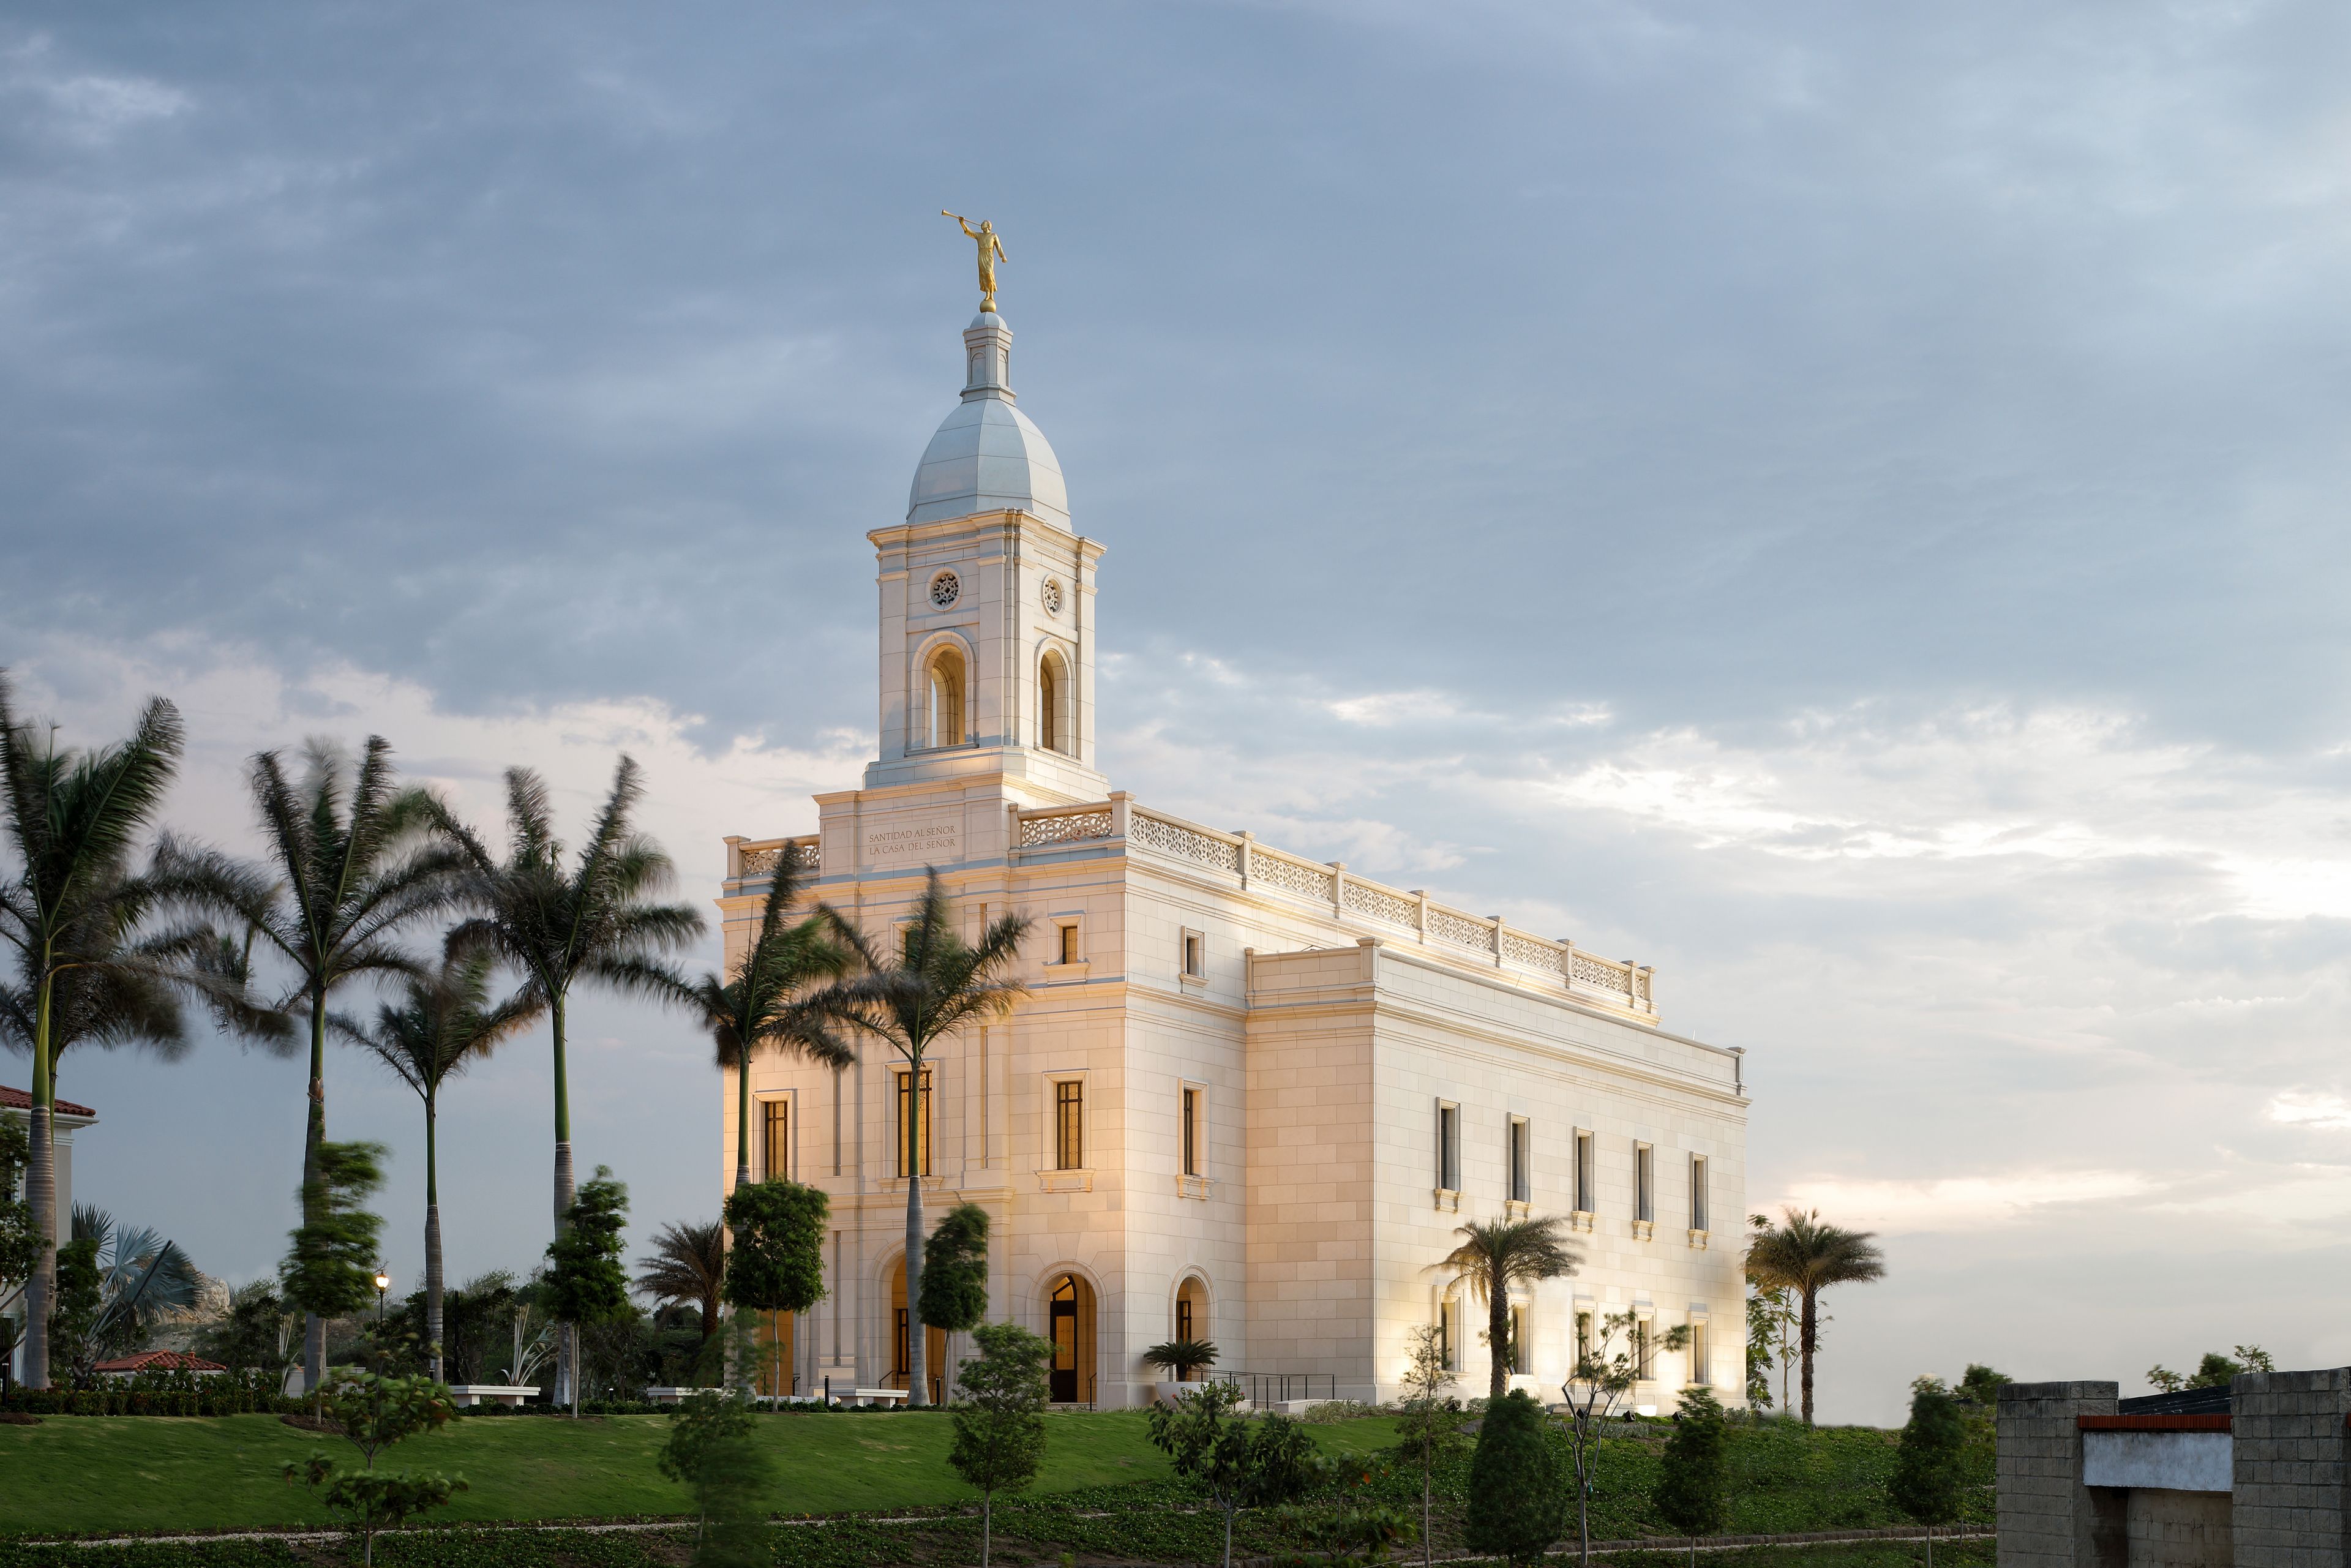 An evening picture of the Barranquilla Colombia Temple surrounded by palm trees.